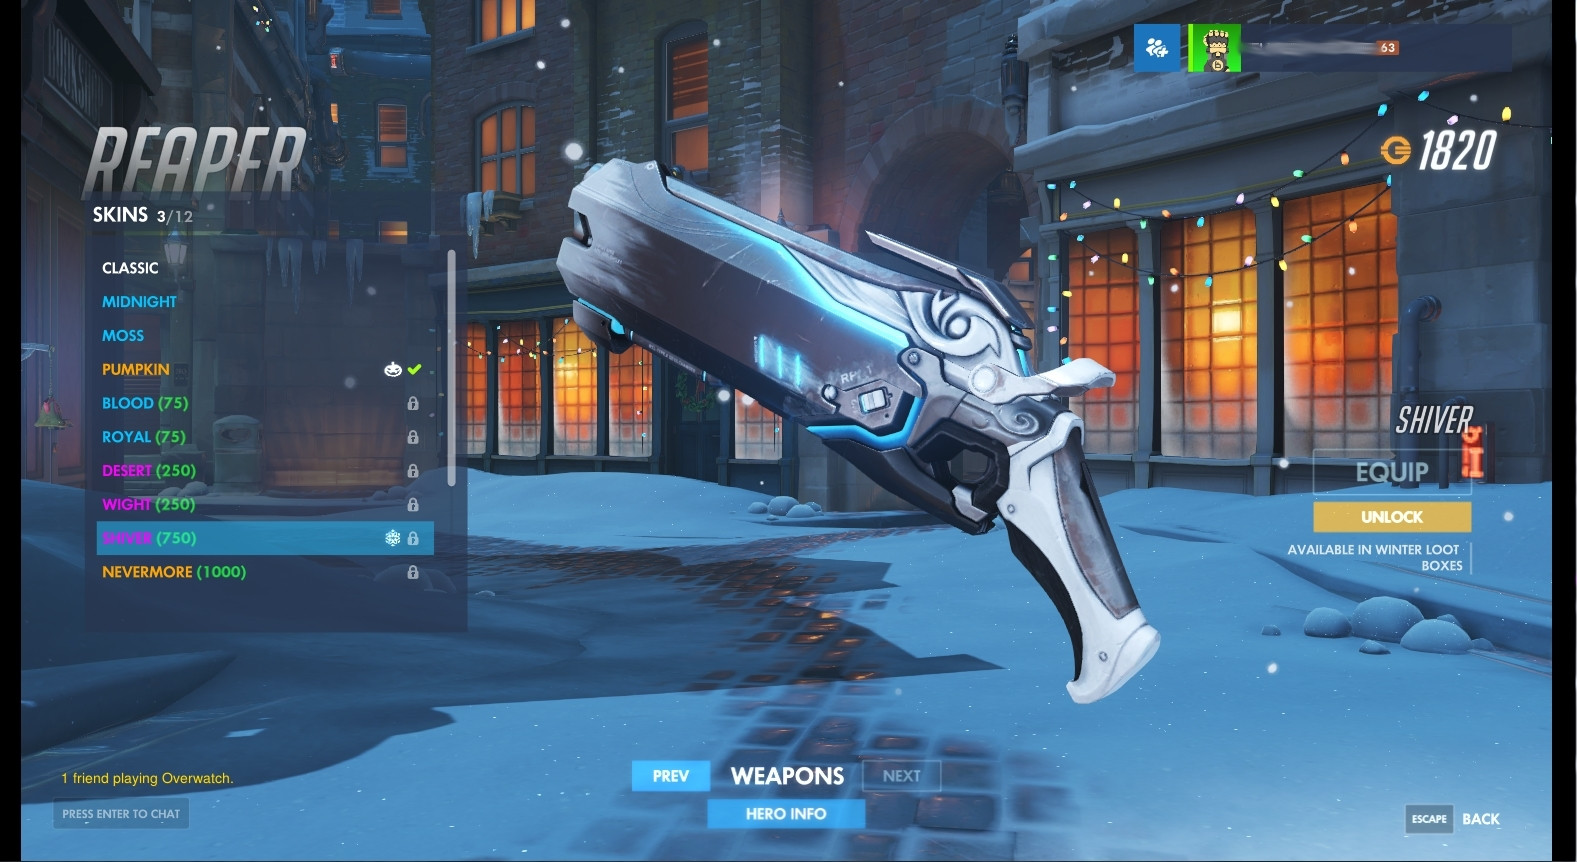 Reaper (Shiver) Weapon